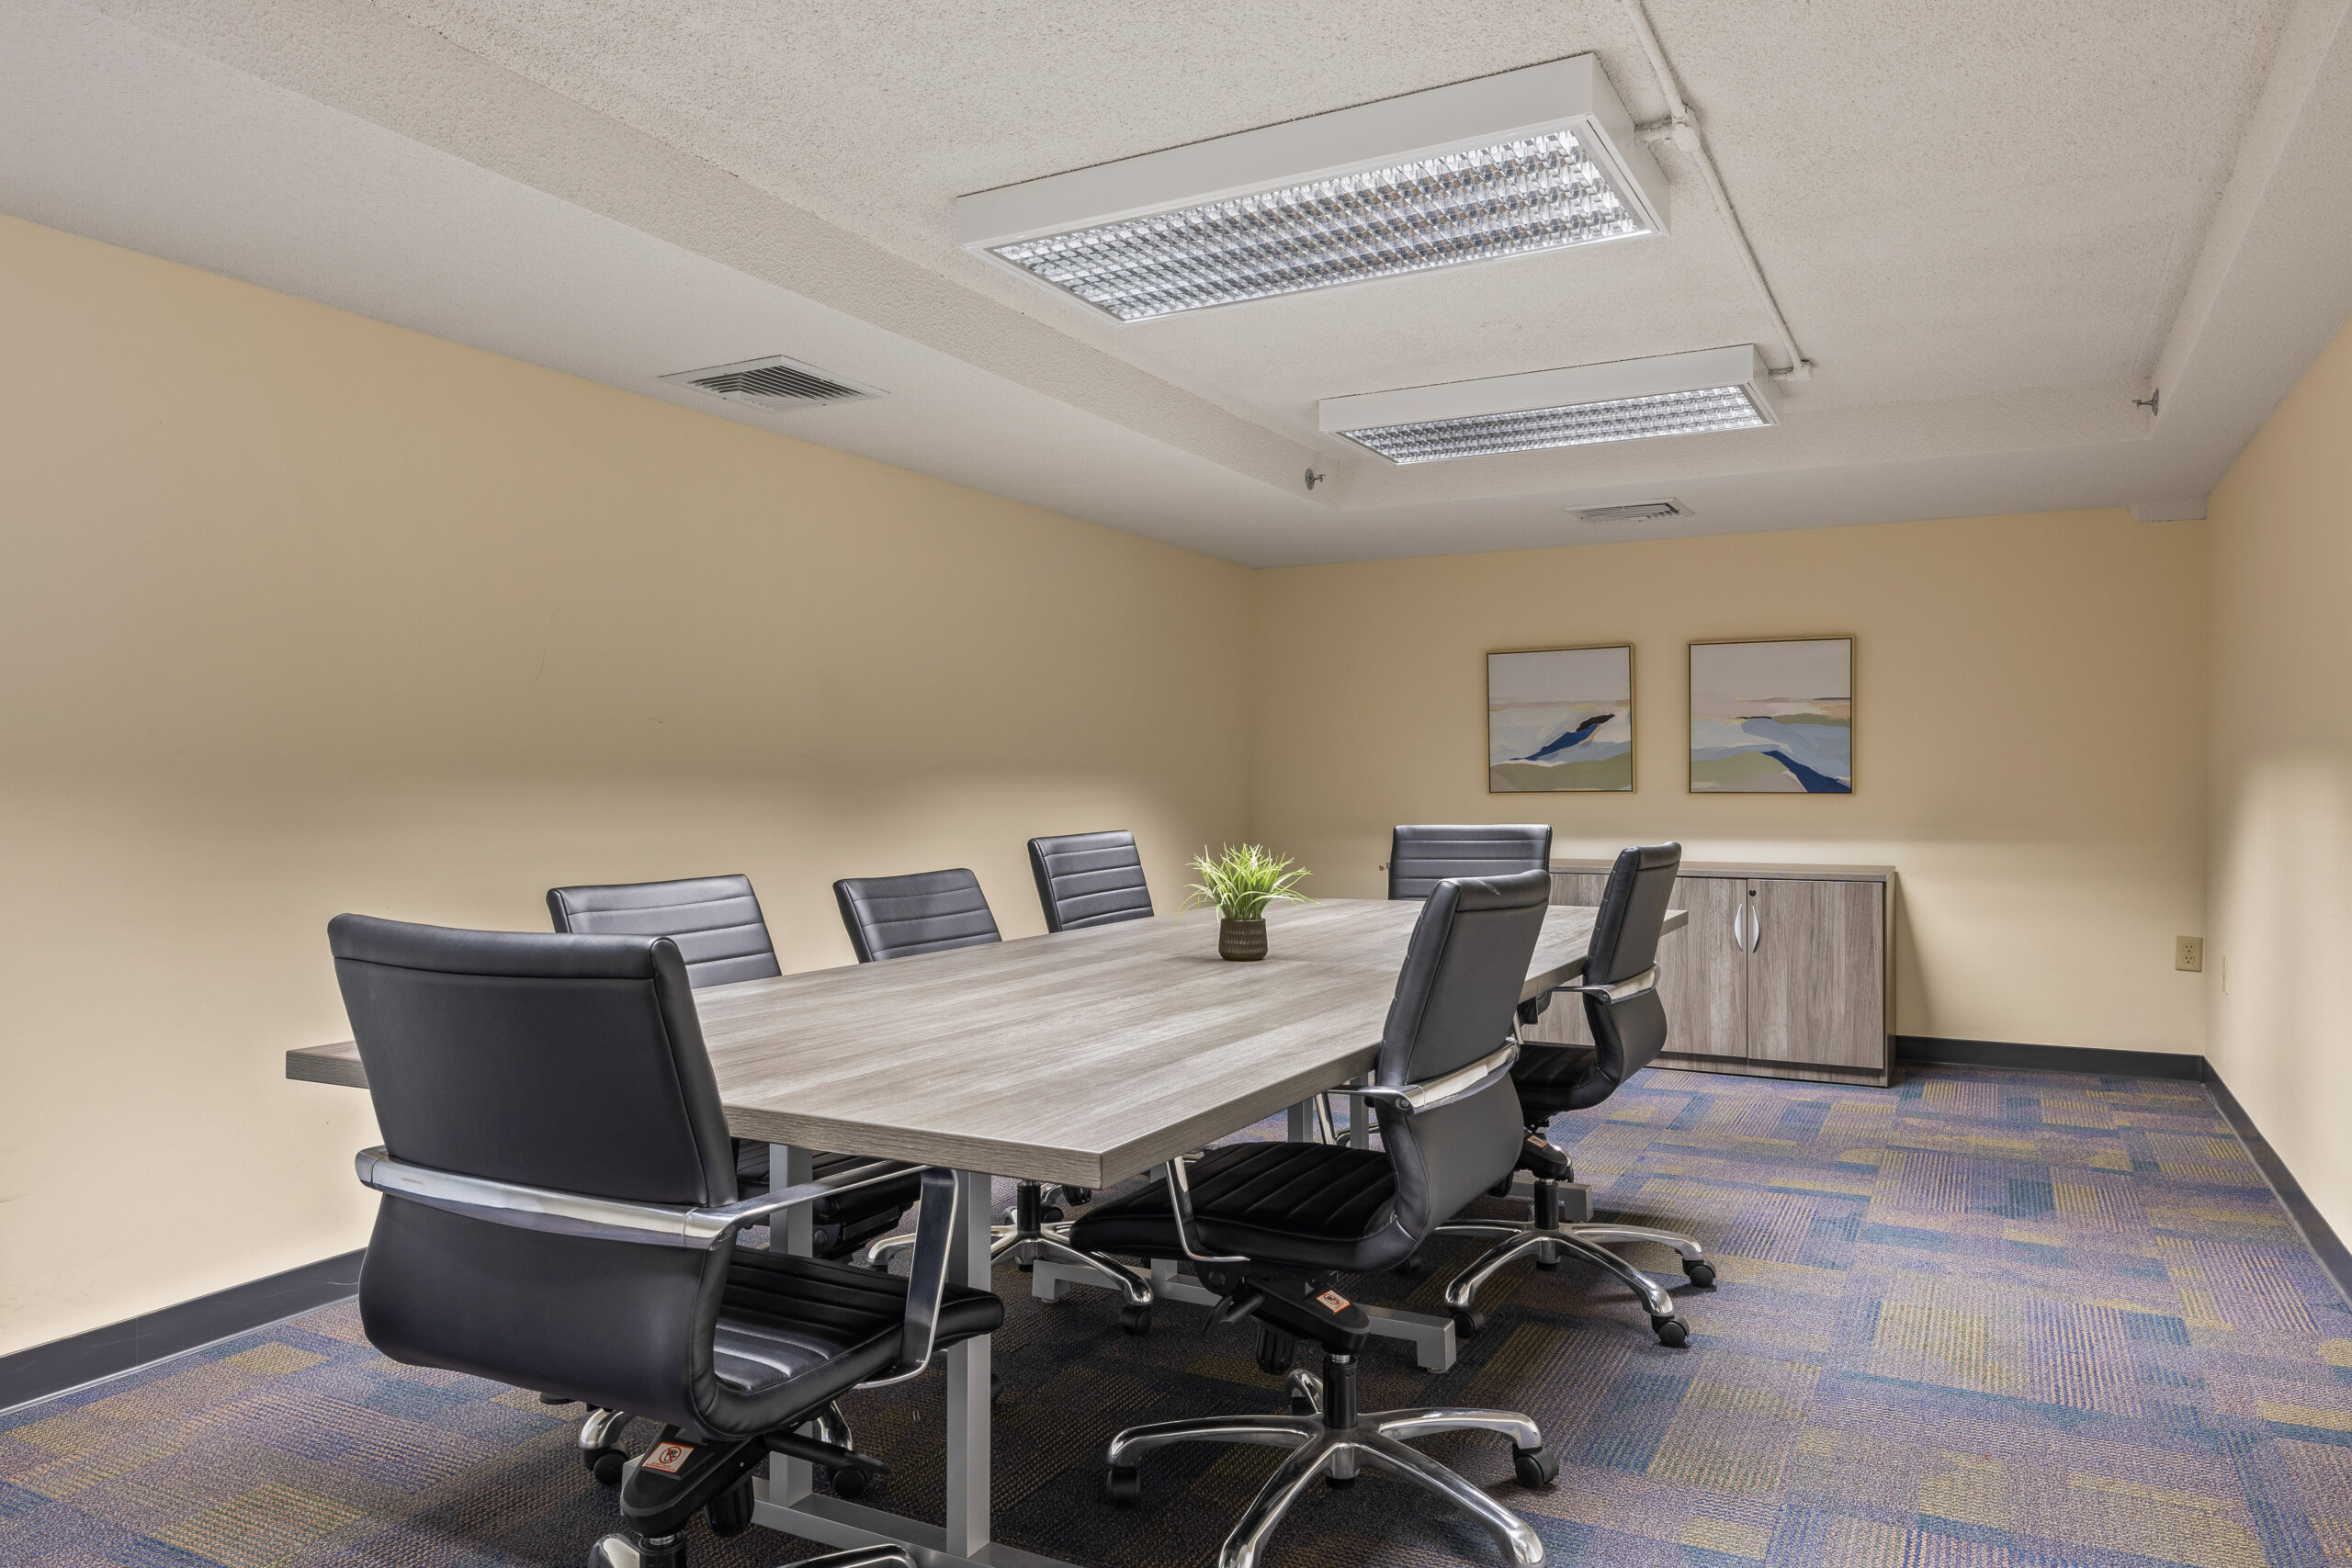 Small Business Center shared conference room with large table and chairs